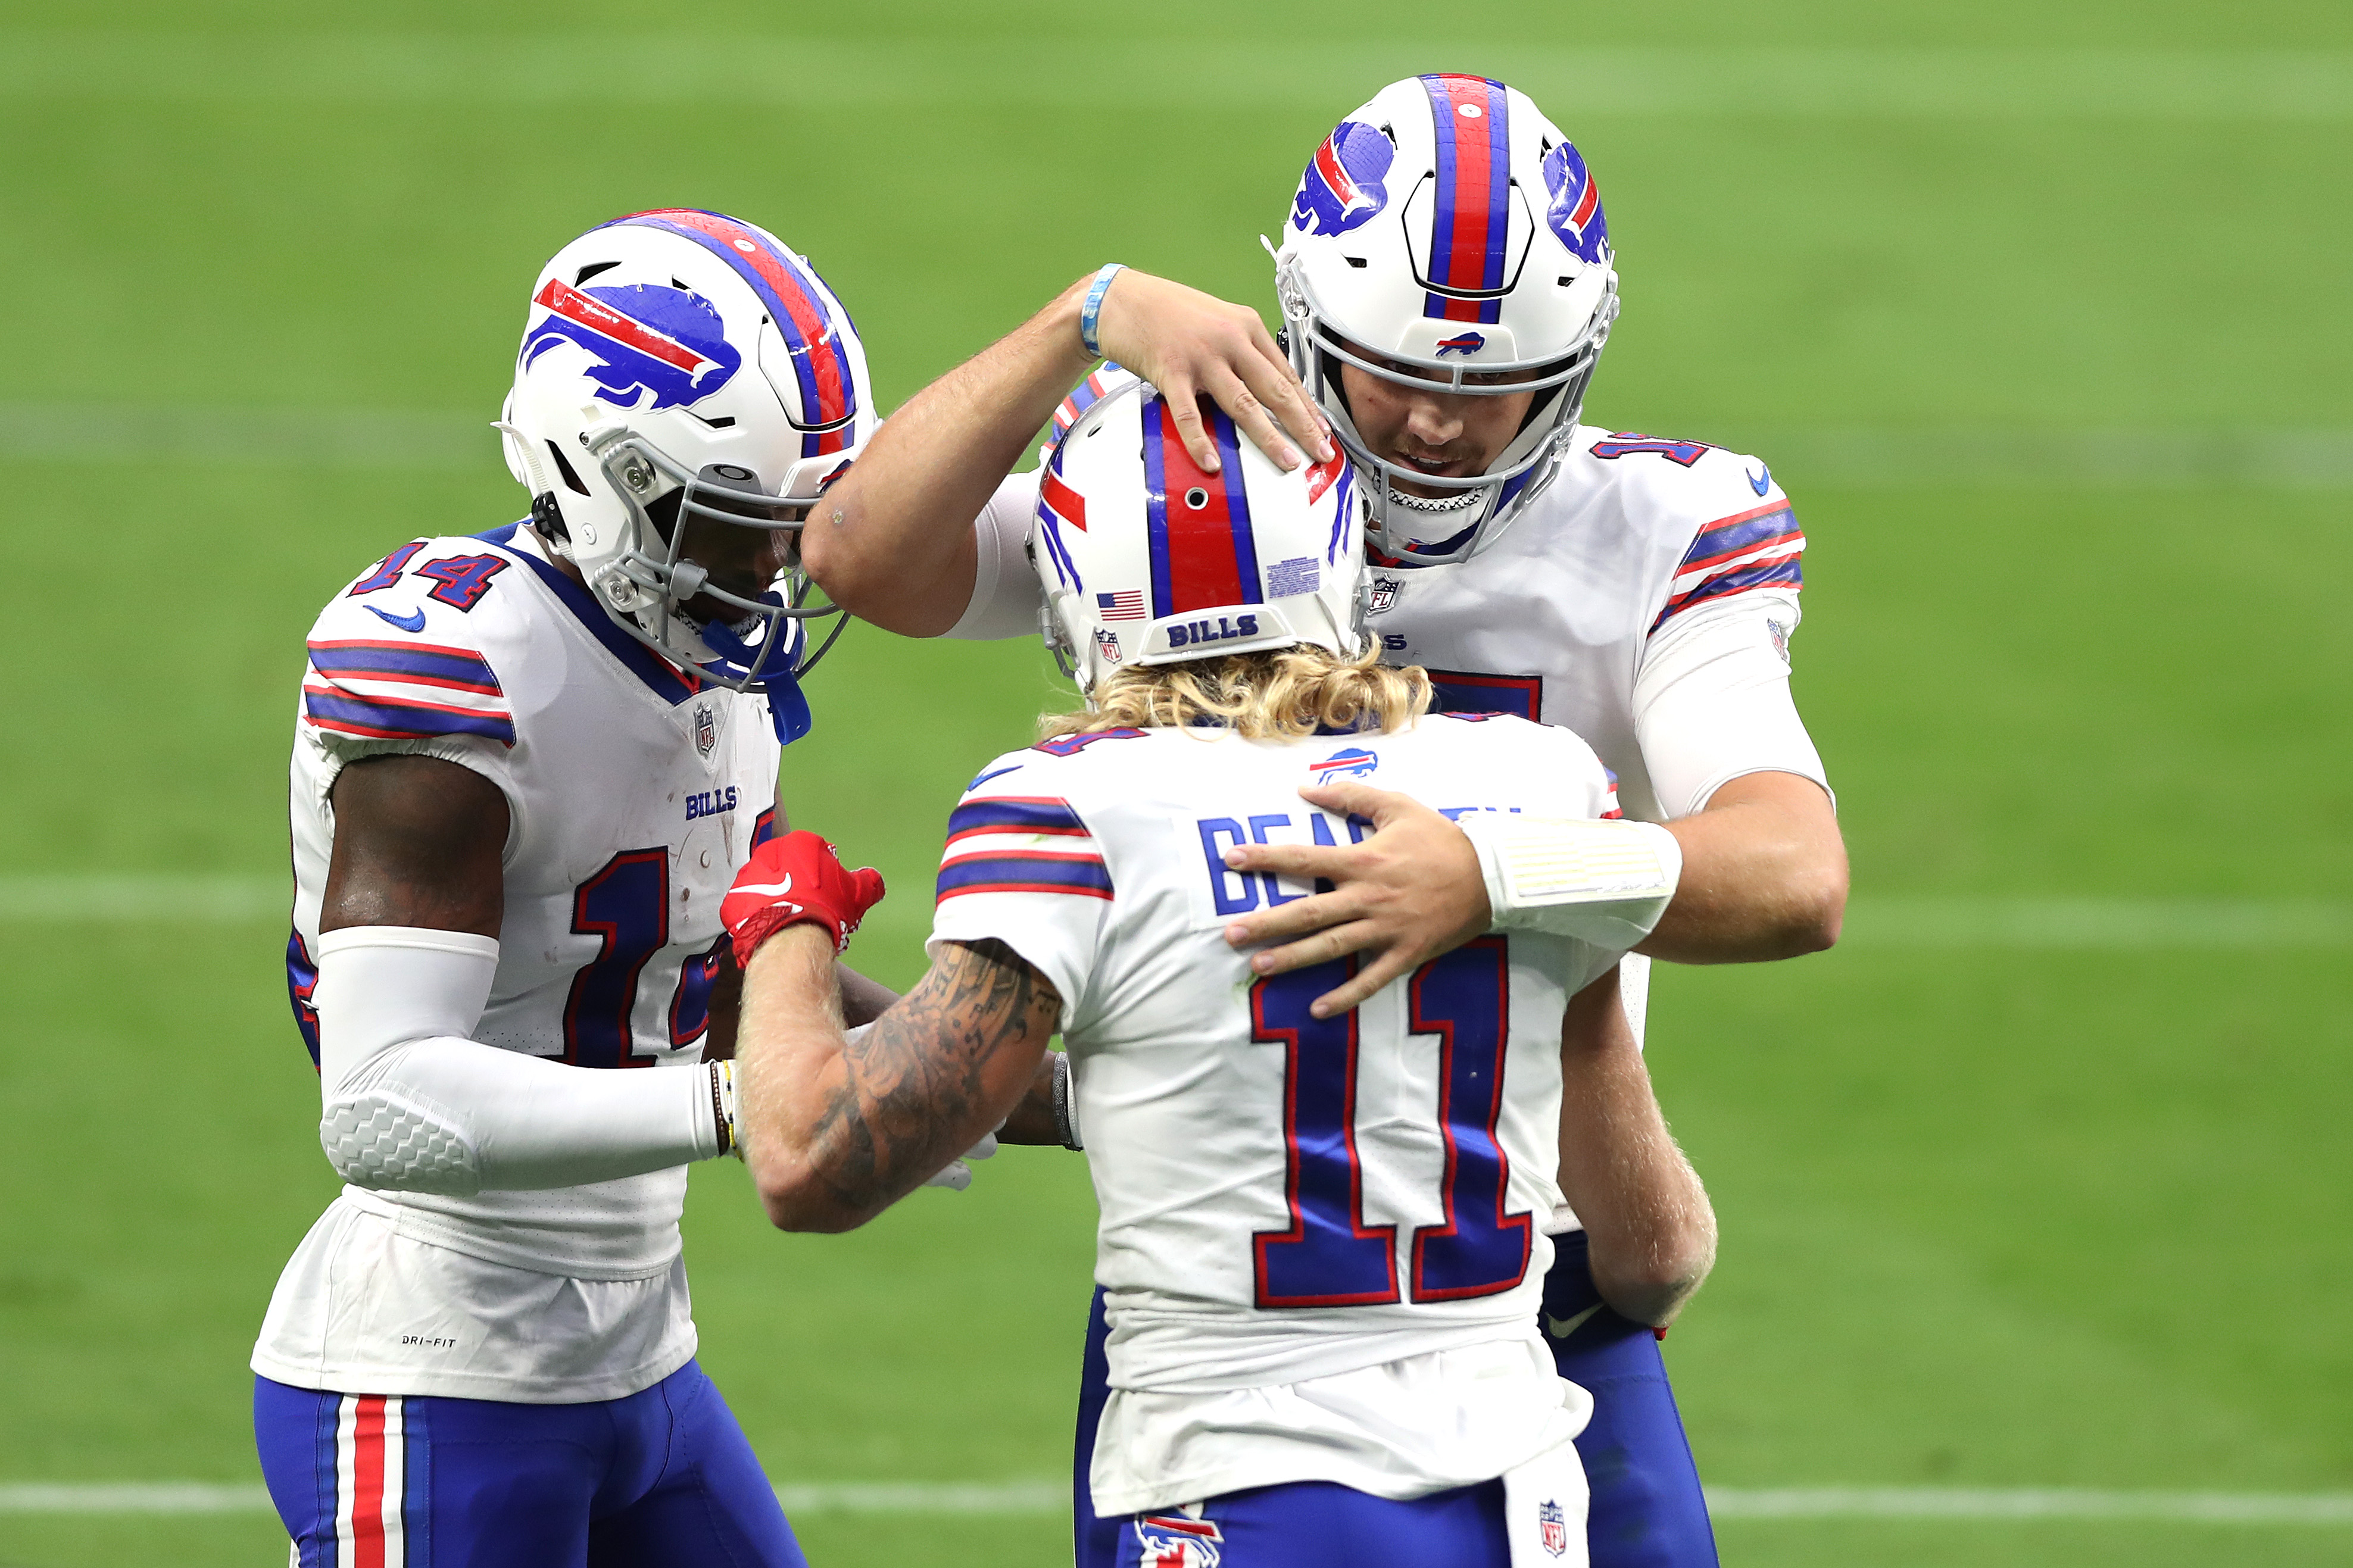 Buffalo Bills stars Stefon Diggs and Josh Allen celebrate a Cole Beasley touchdown in a game in October of 2020.